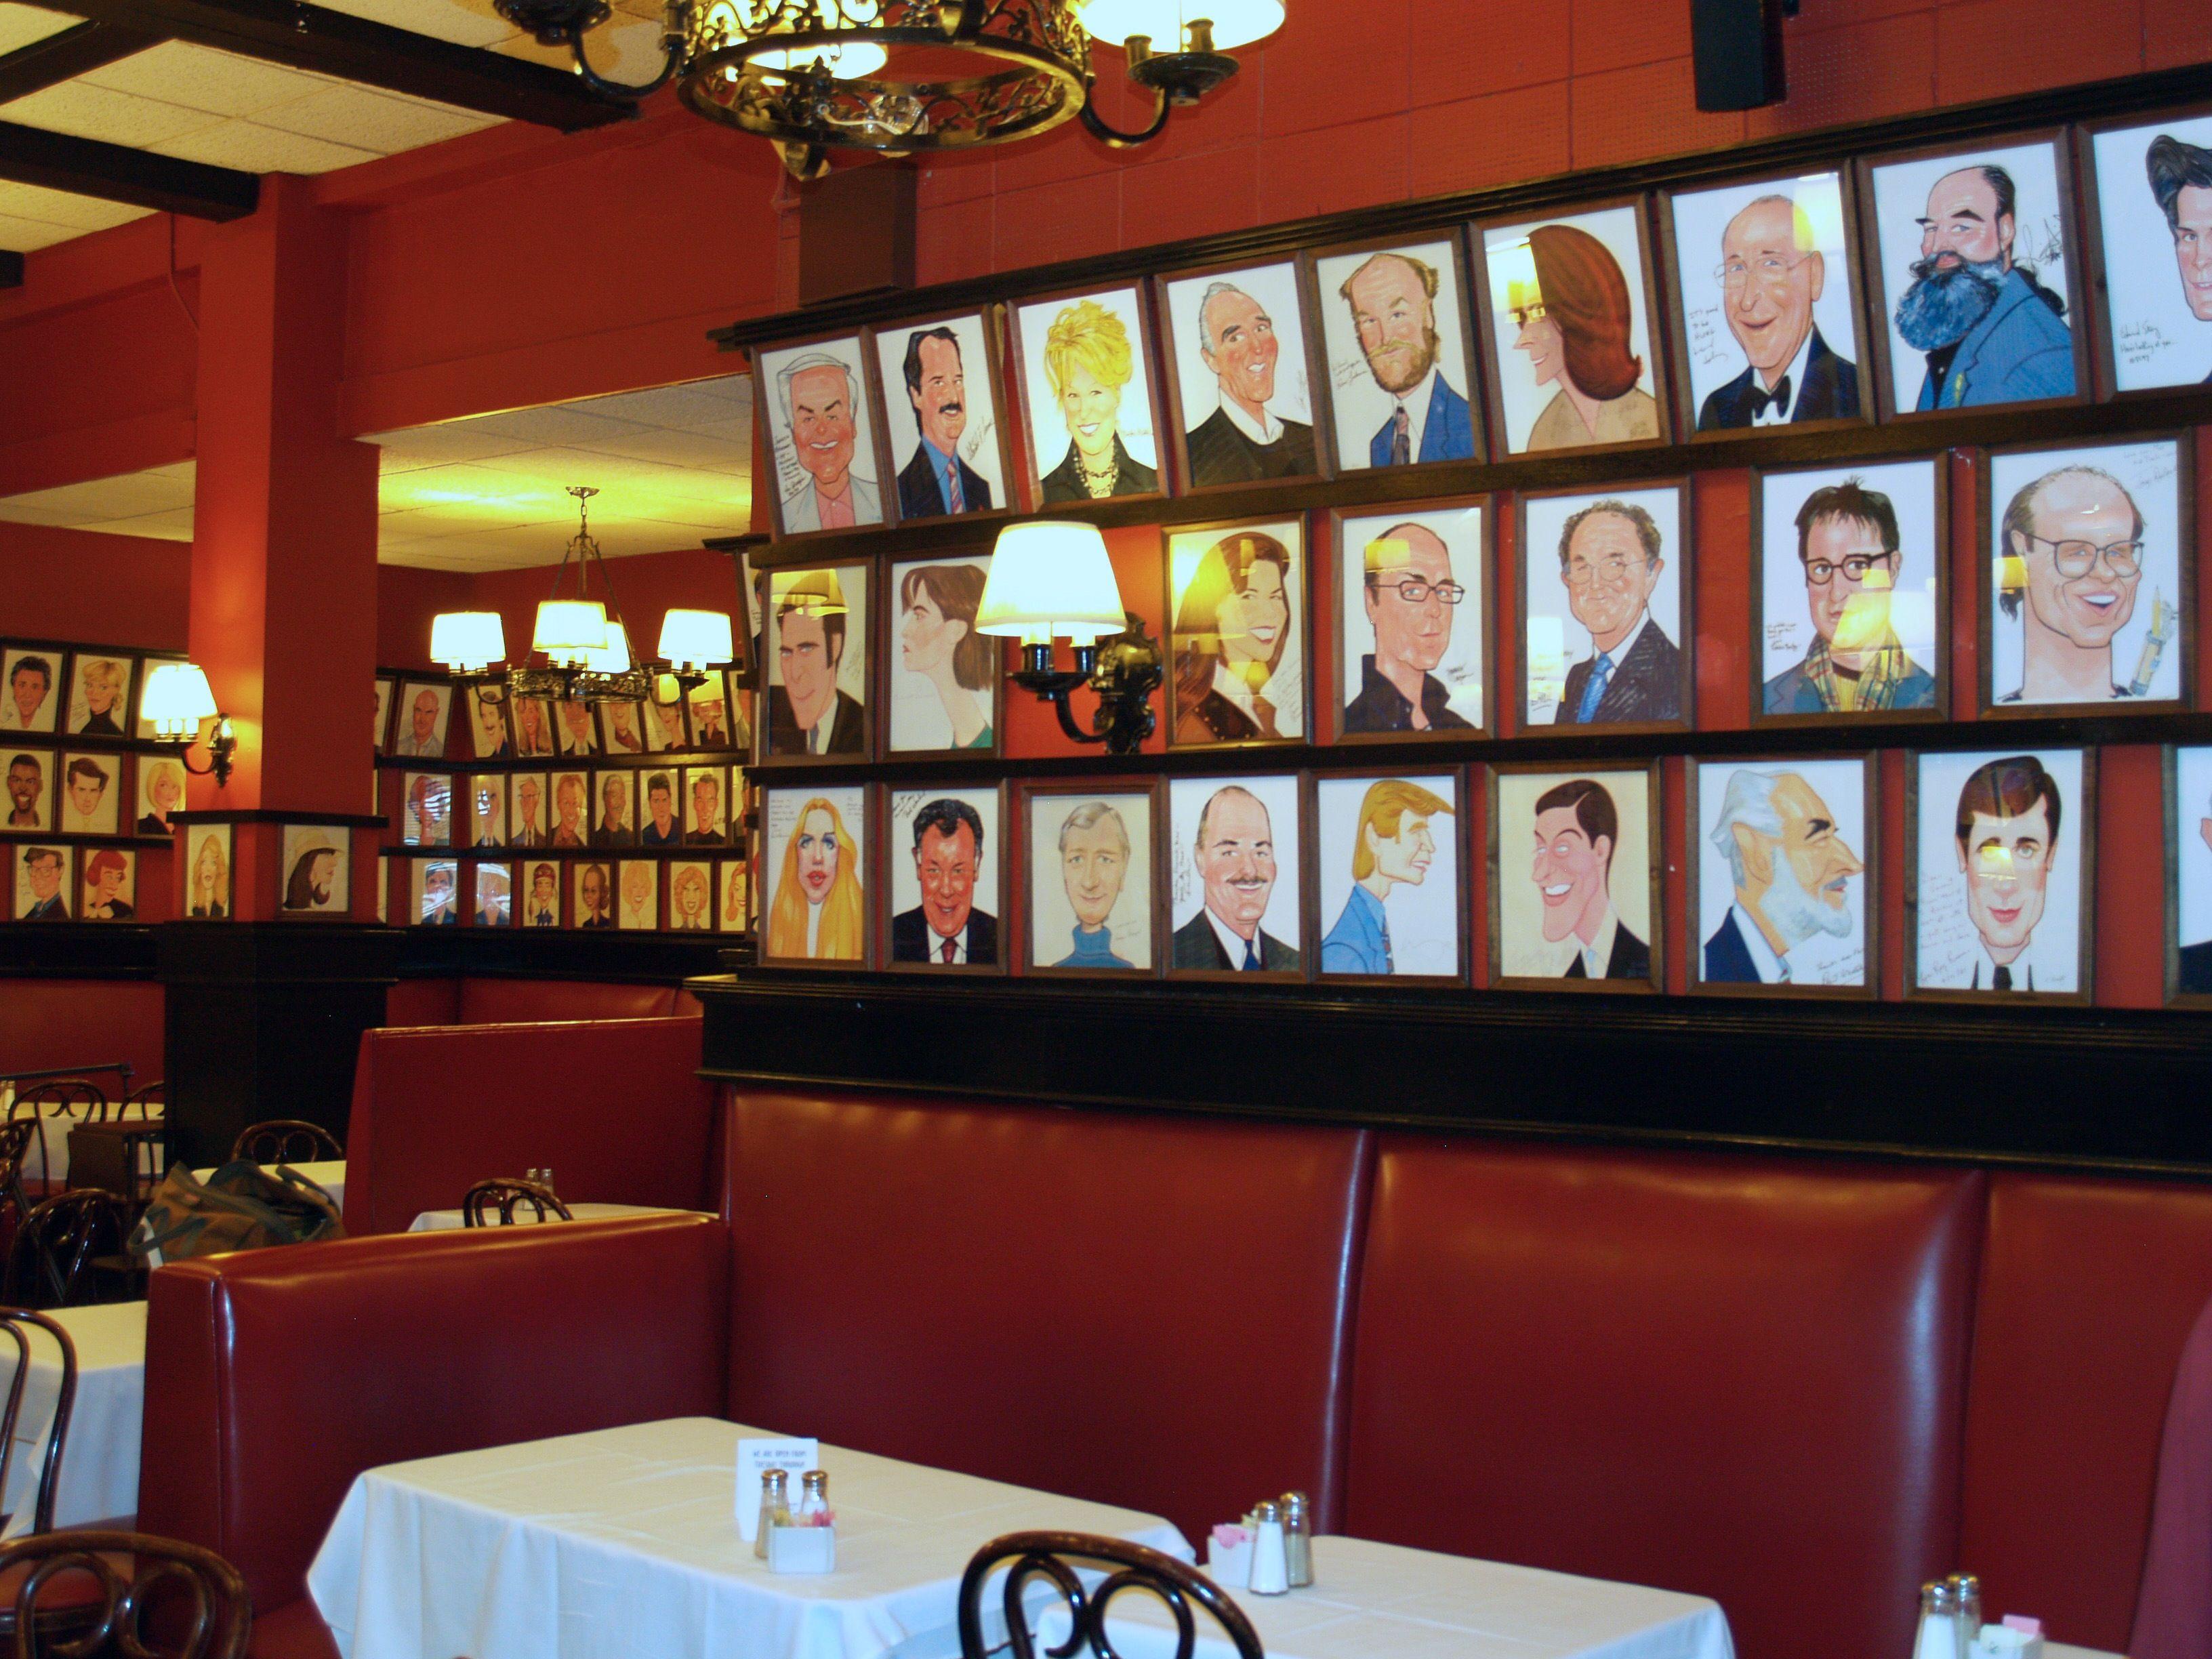 Restarants of Red Colored Logo - Can a Restaurant's Wall Color Affect Your Appetite? – Butlers ...